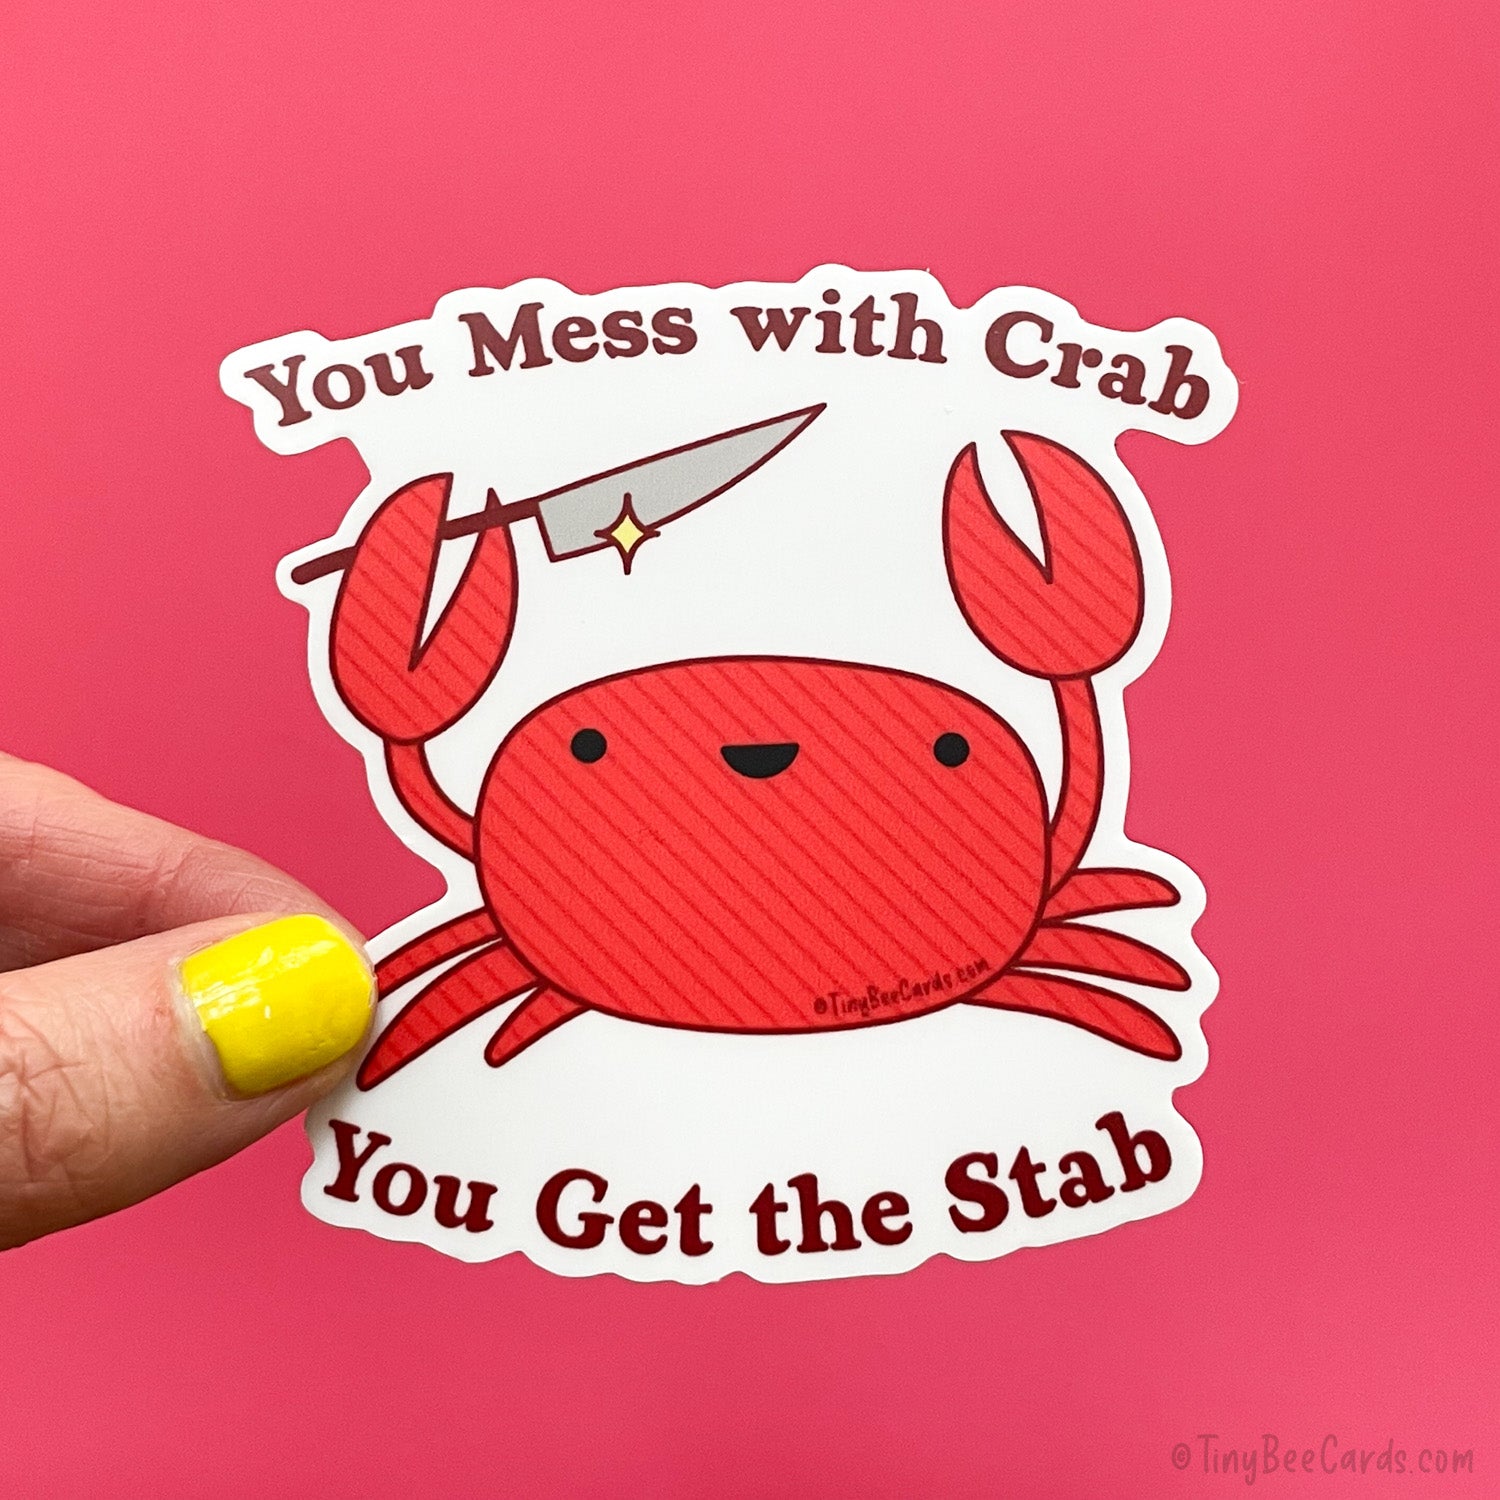 Vinyl Sticker with a Crab and the text "You Mess with Crab, You Get the Stab" 